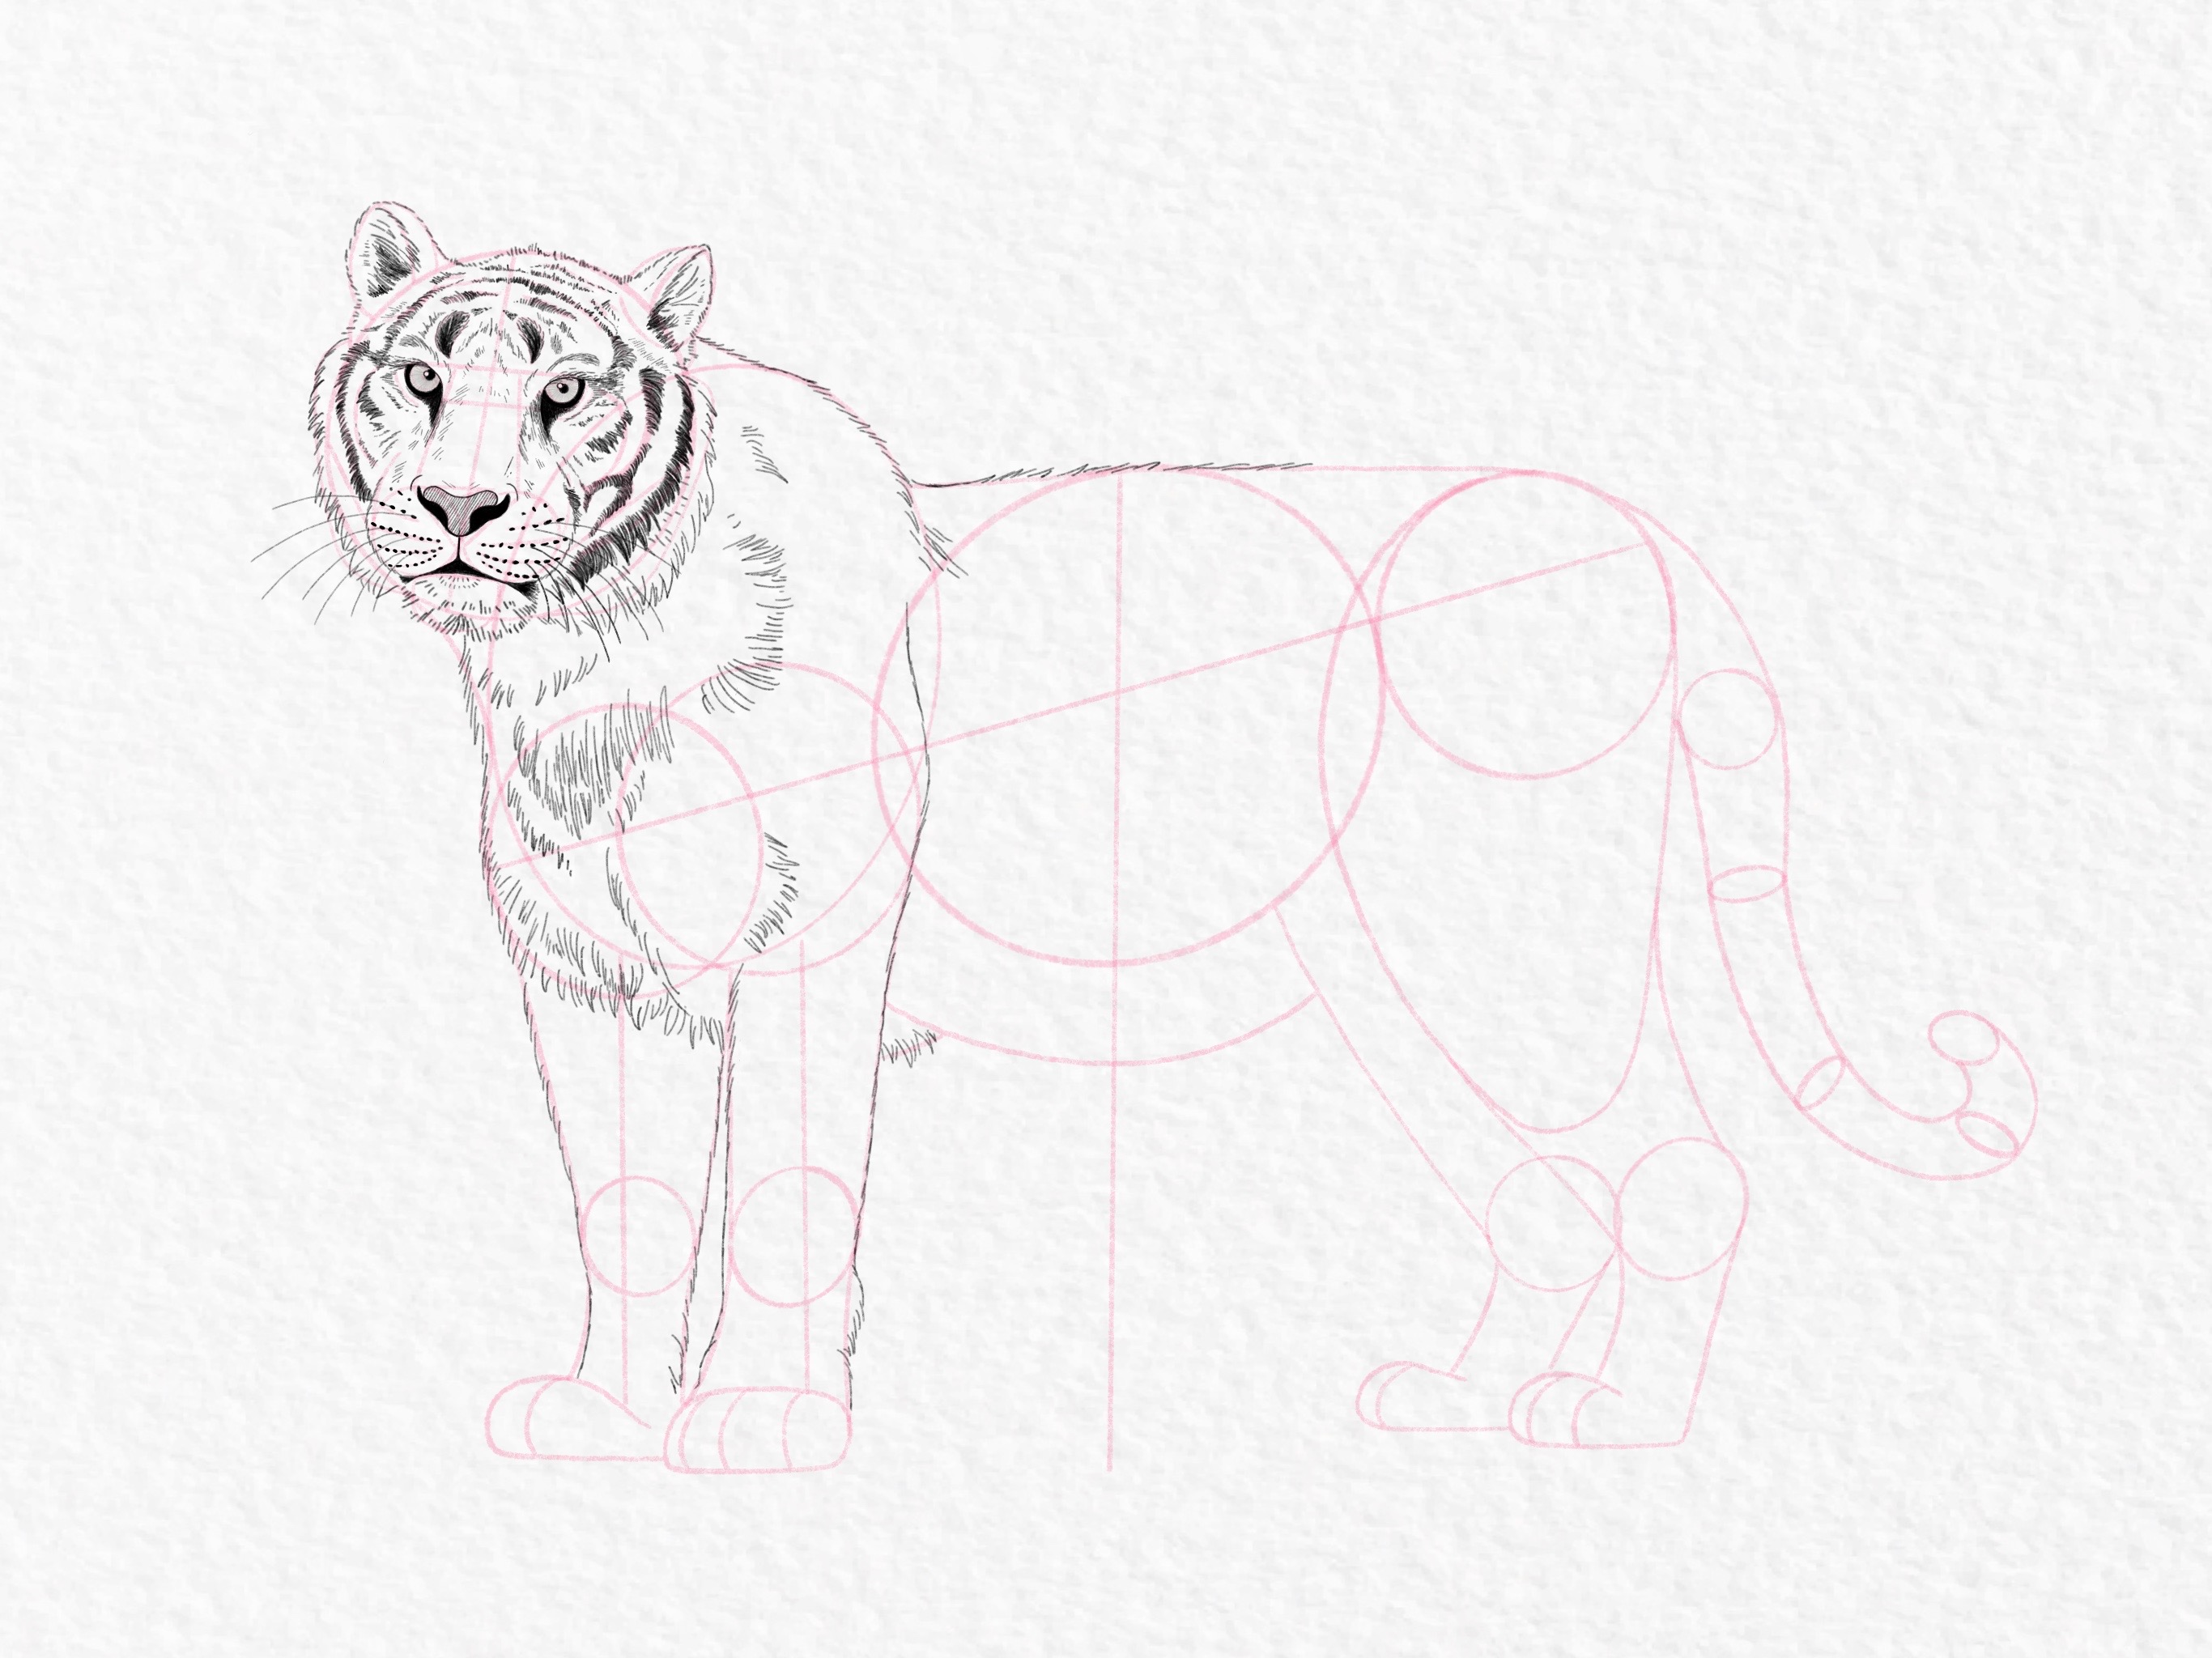 How to draw a tiger, step by step tutorial - step 39